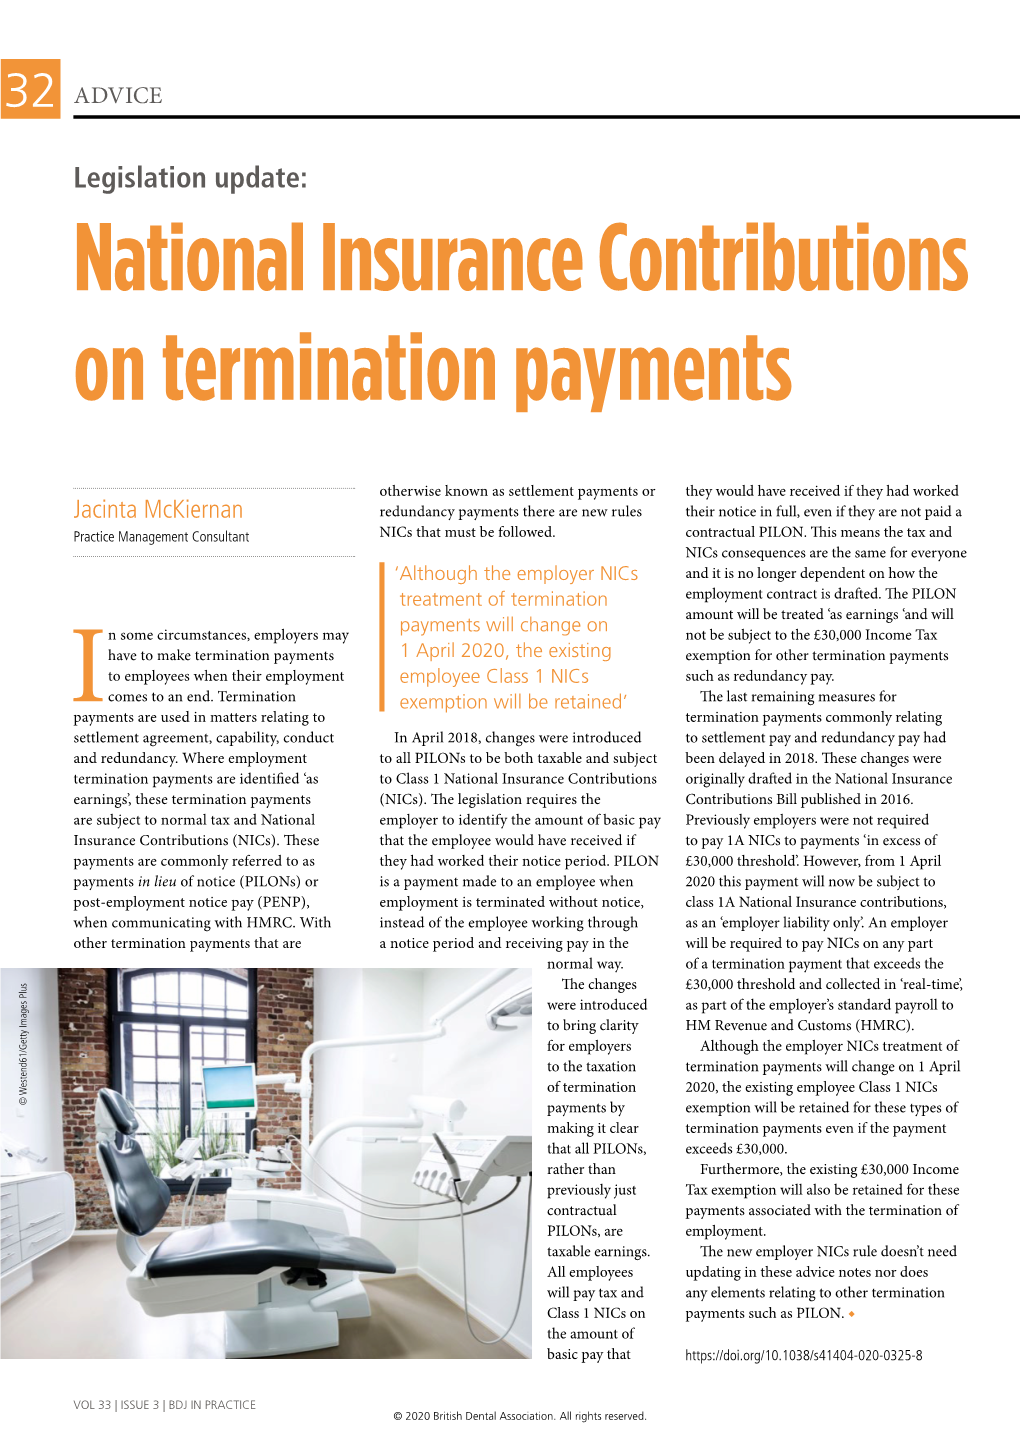 National Insurance Contributions on Termination Payments